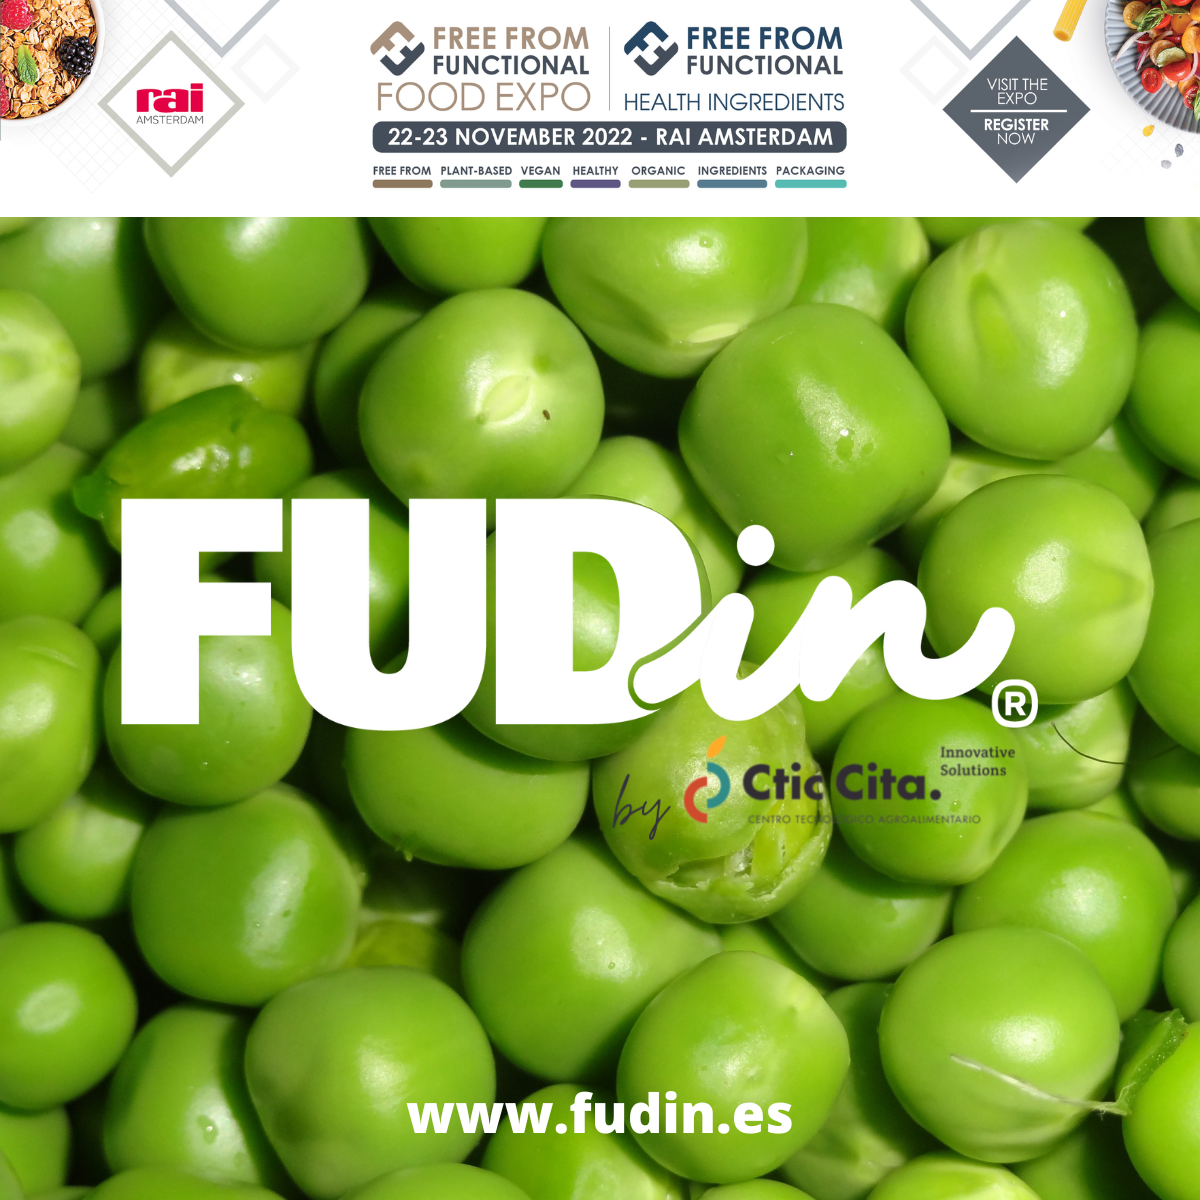 FREEFROM_AMS2022_FUDin